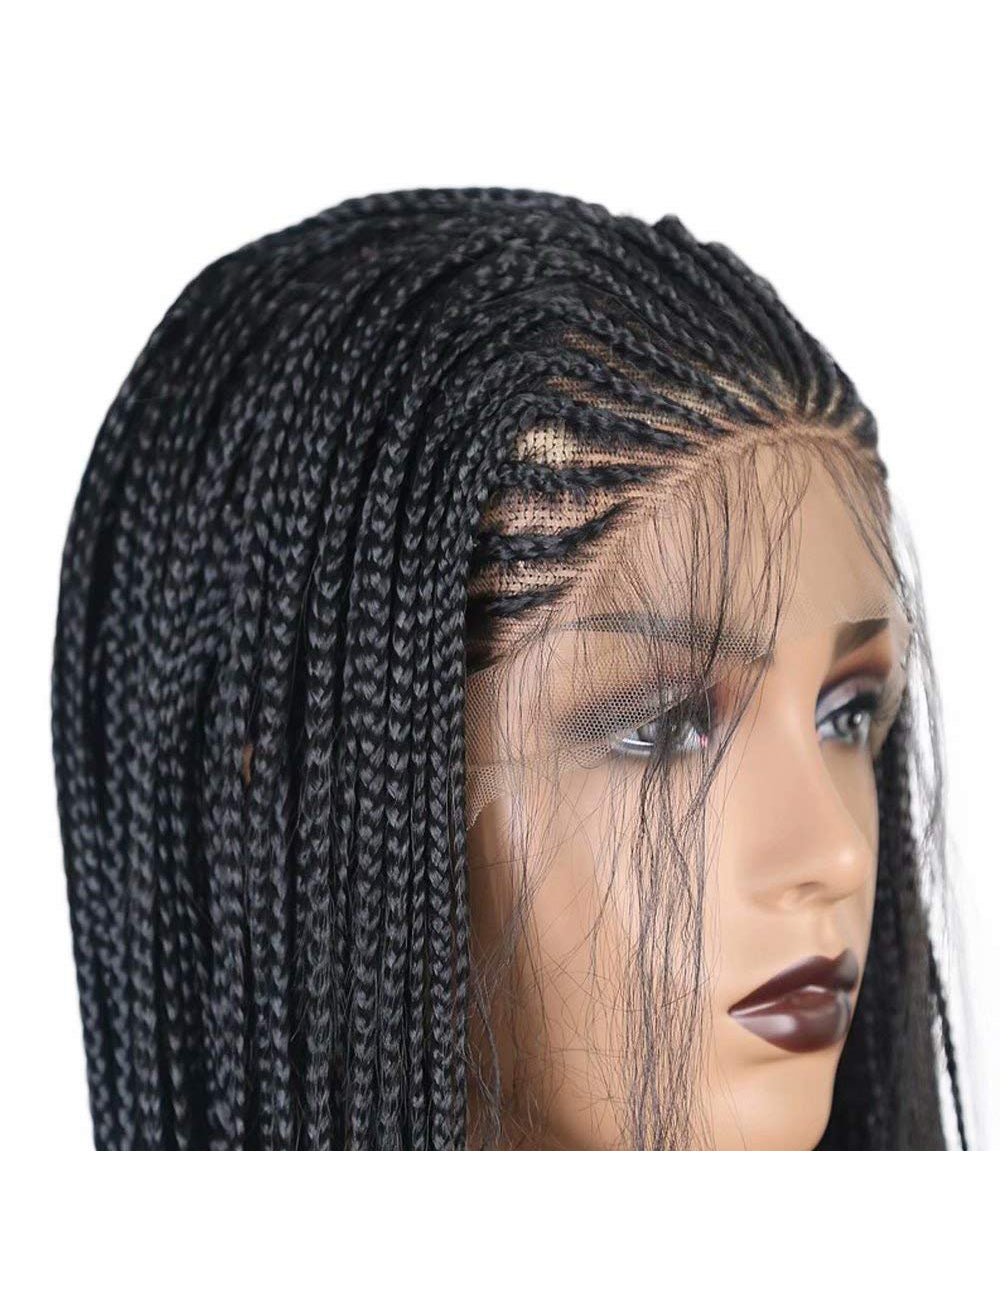 18 Inch Lace Front Hand Braided Black Box Braided Wigs